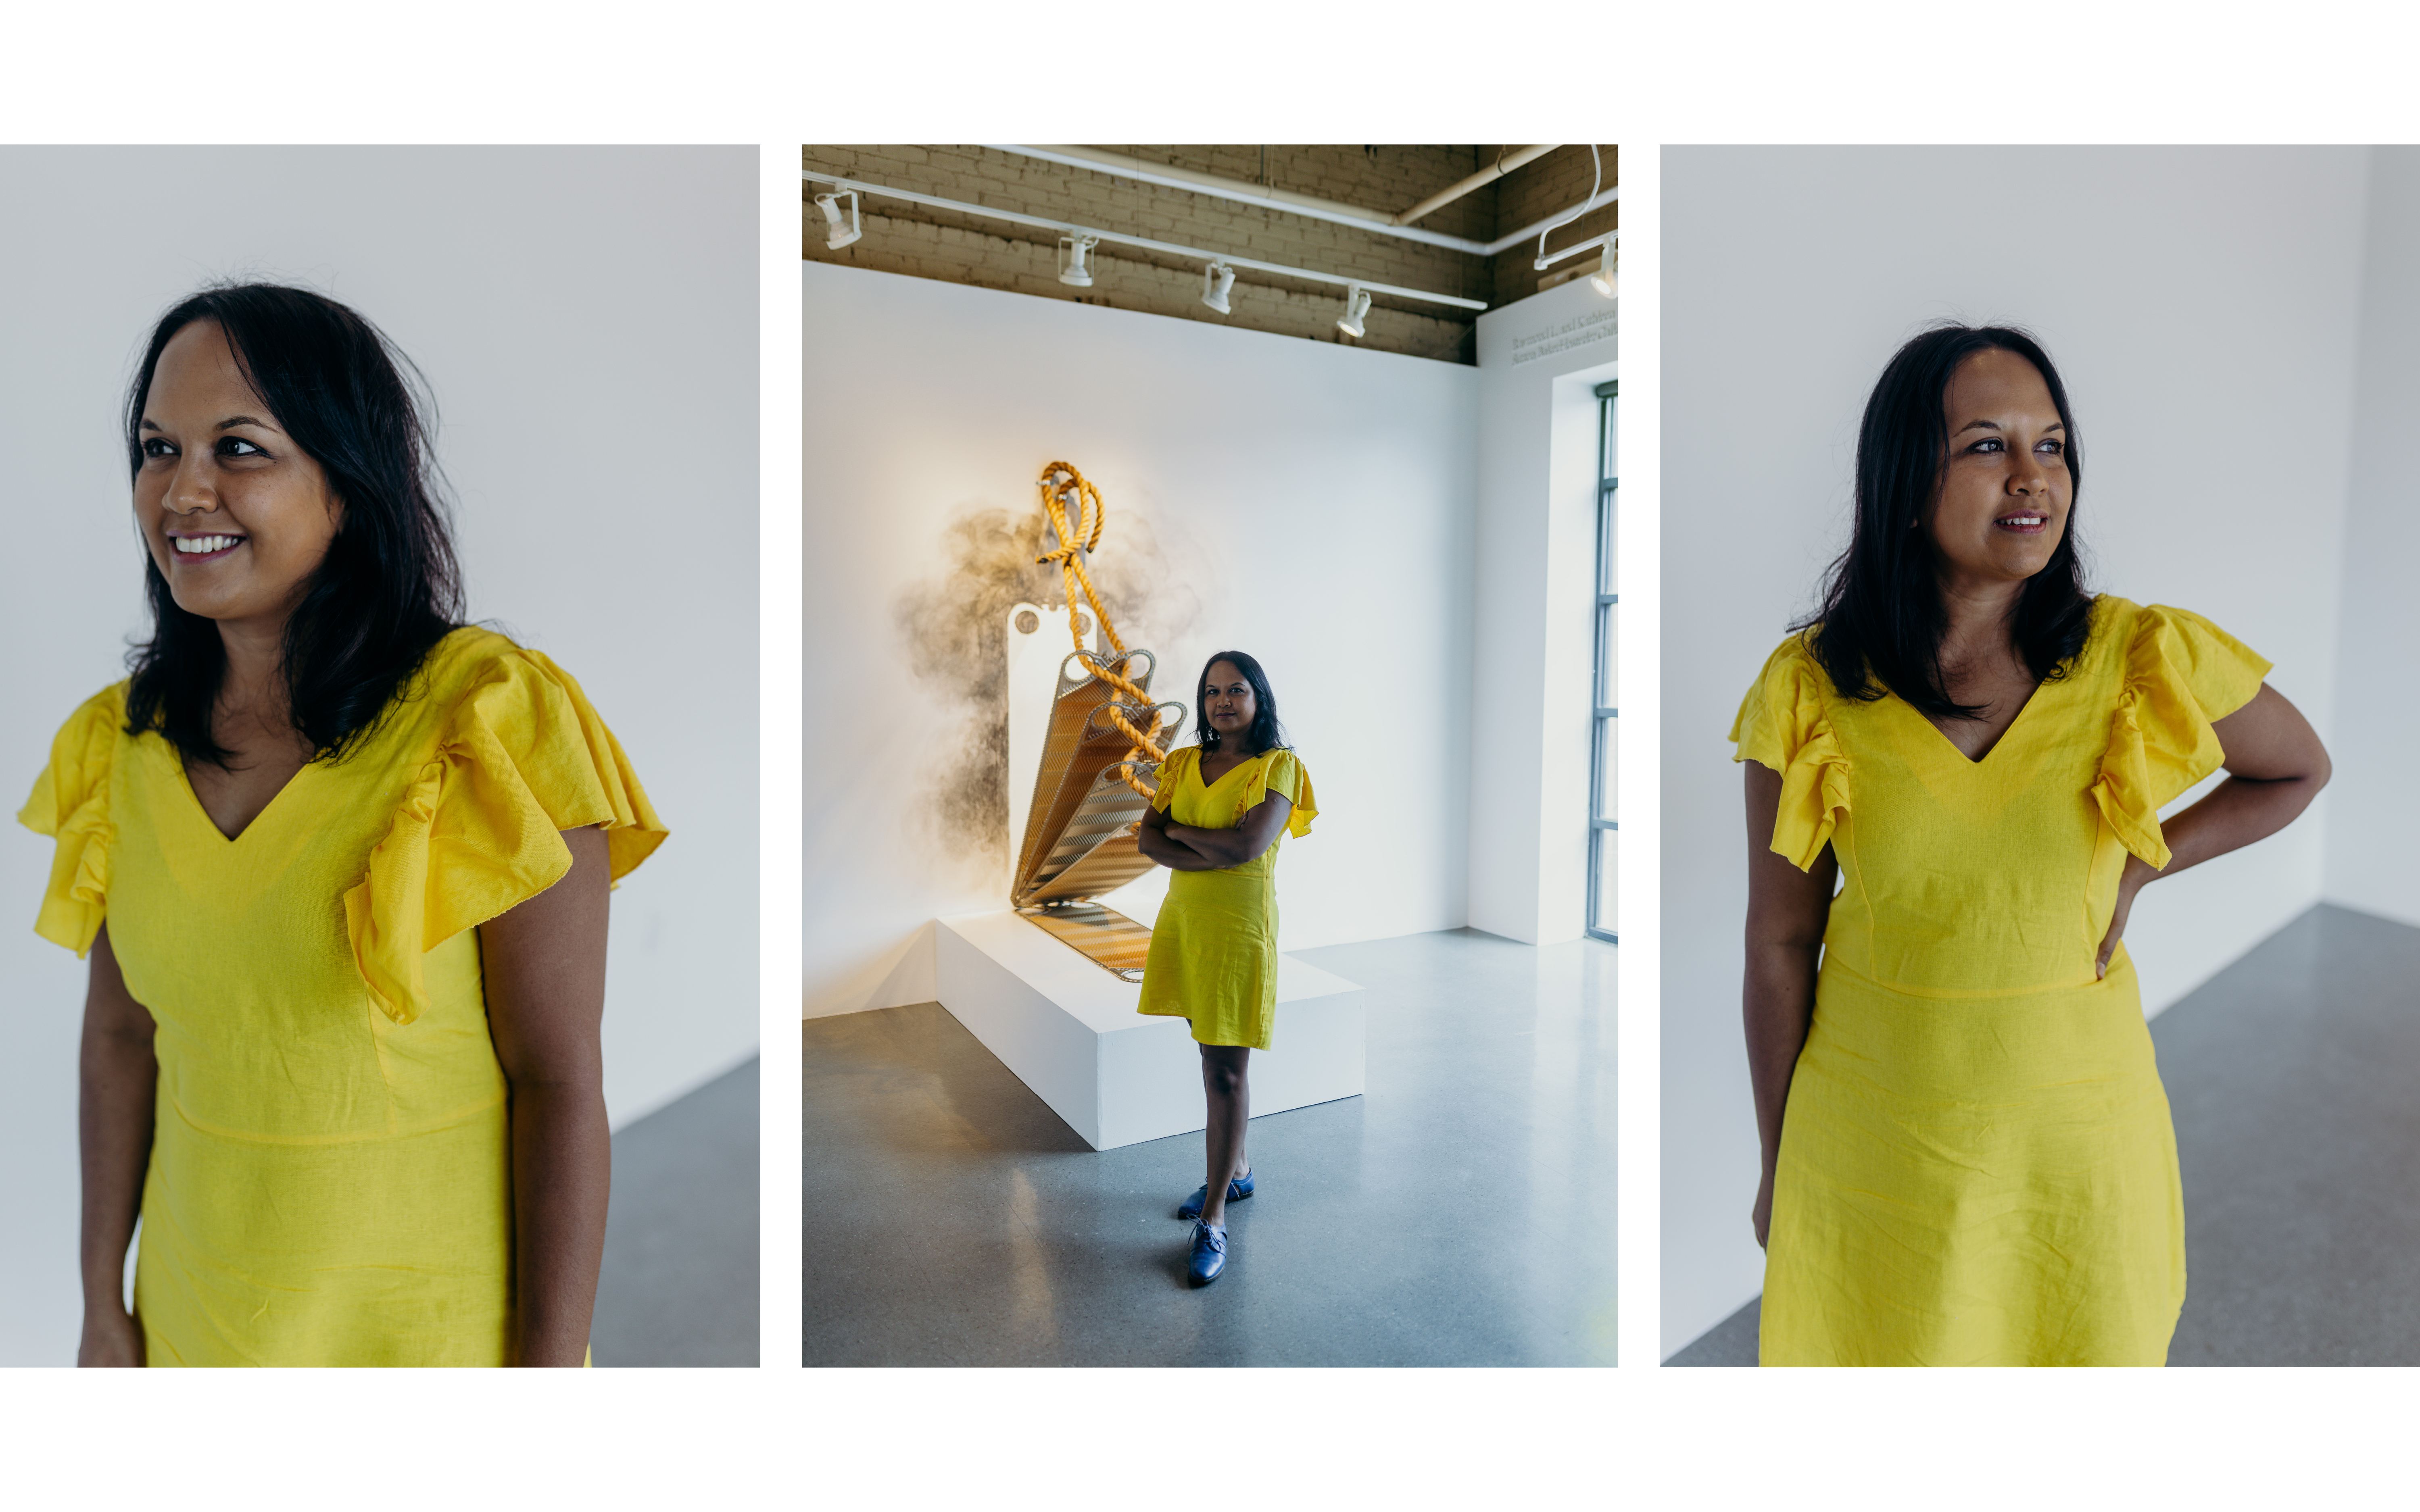 A three paneled photograph of Suchitra smiling in a yellow dress against blank white gallery walls. 